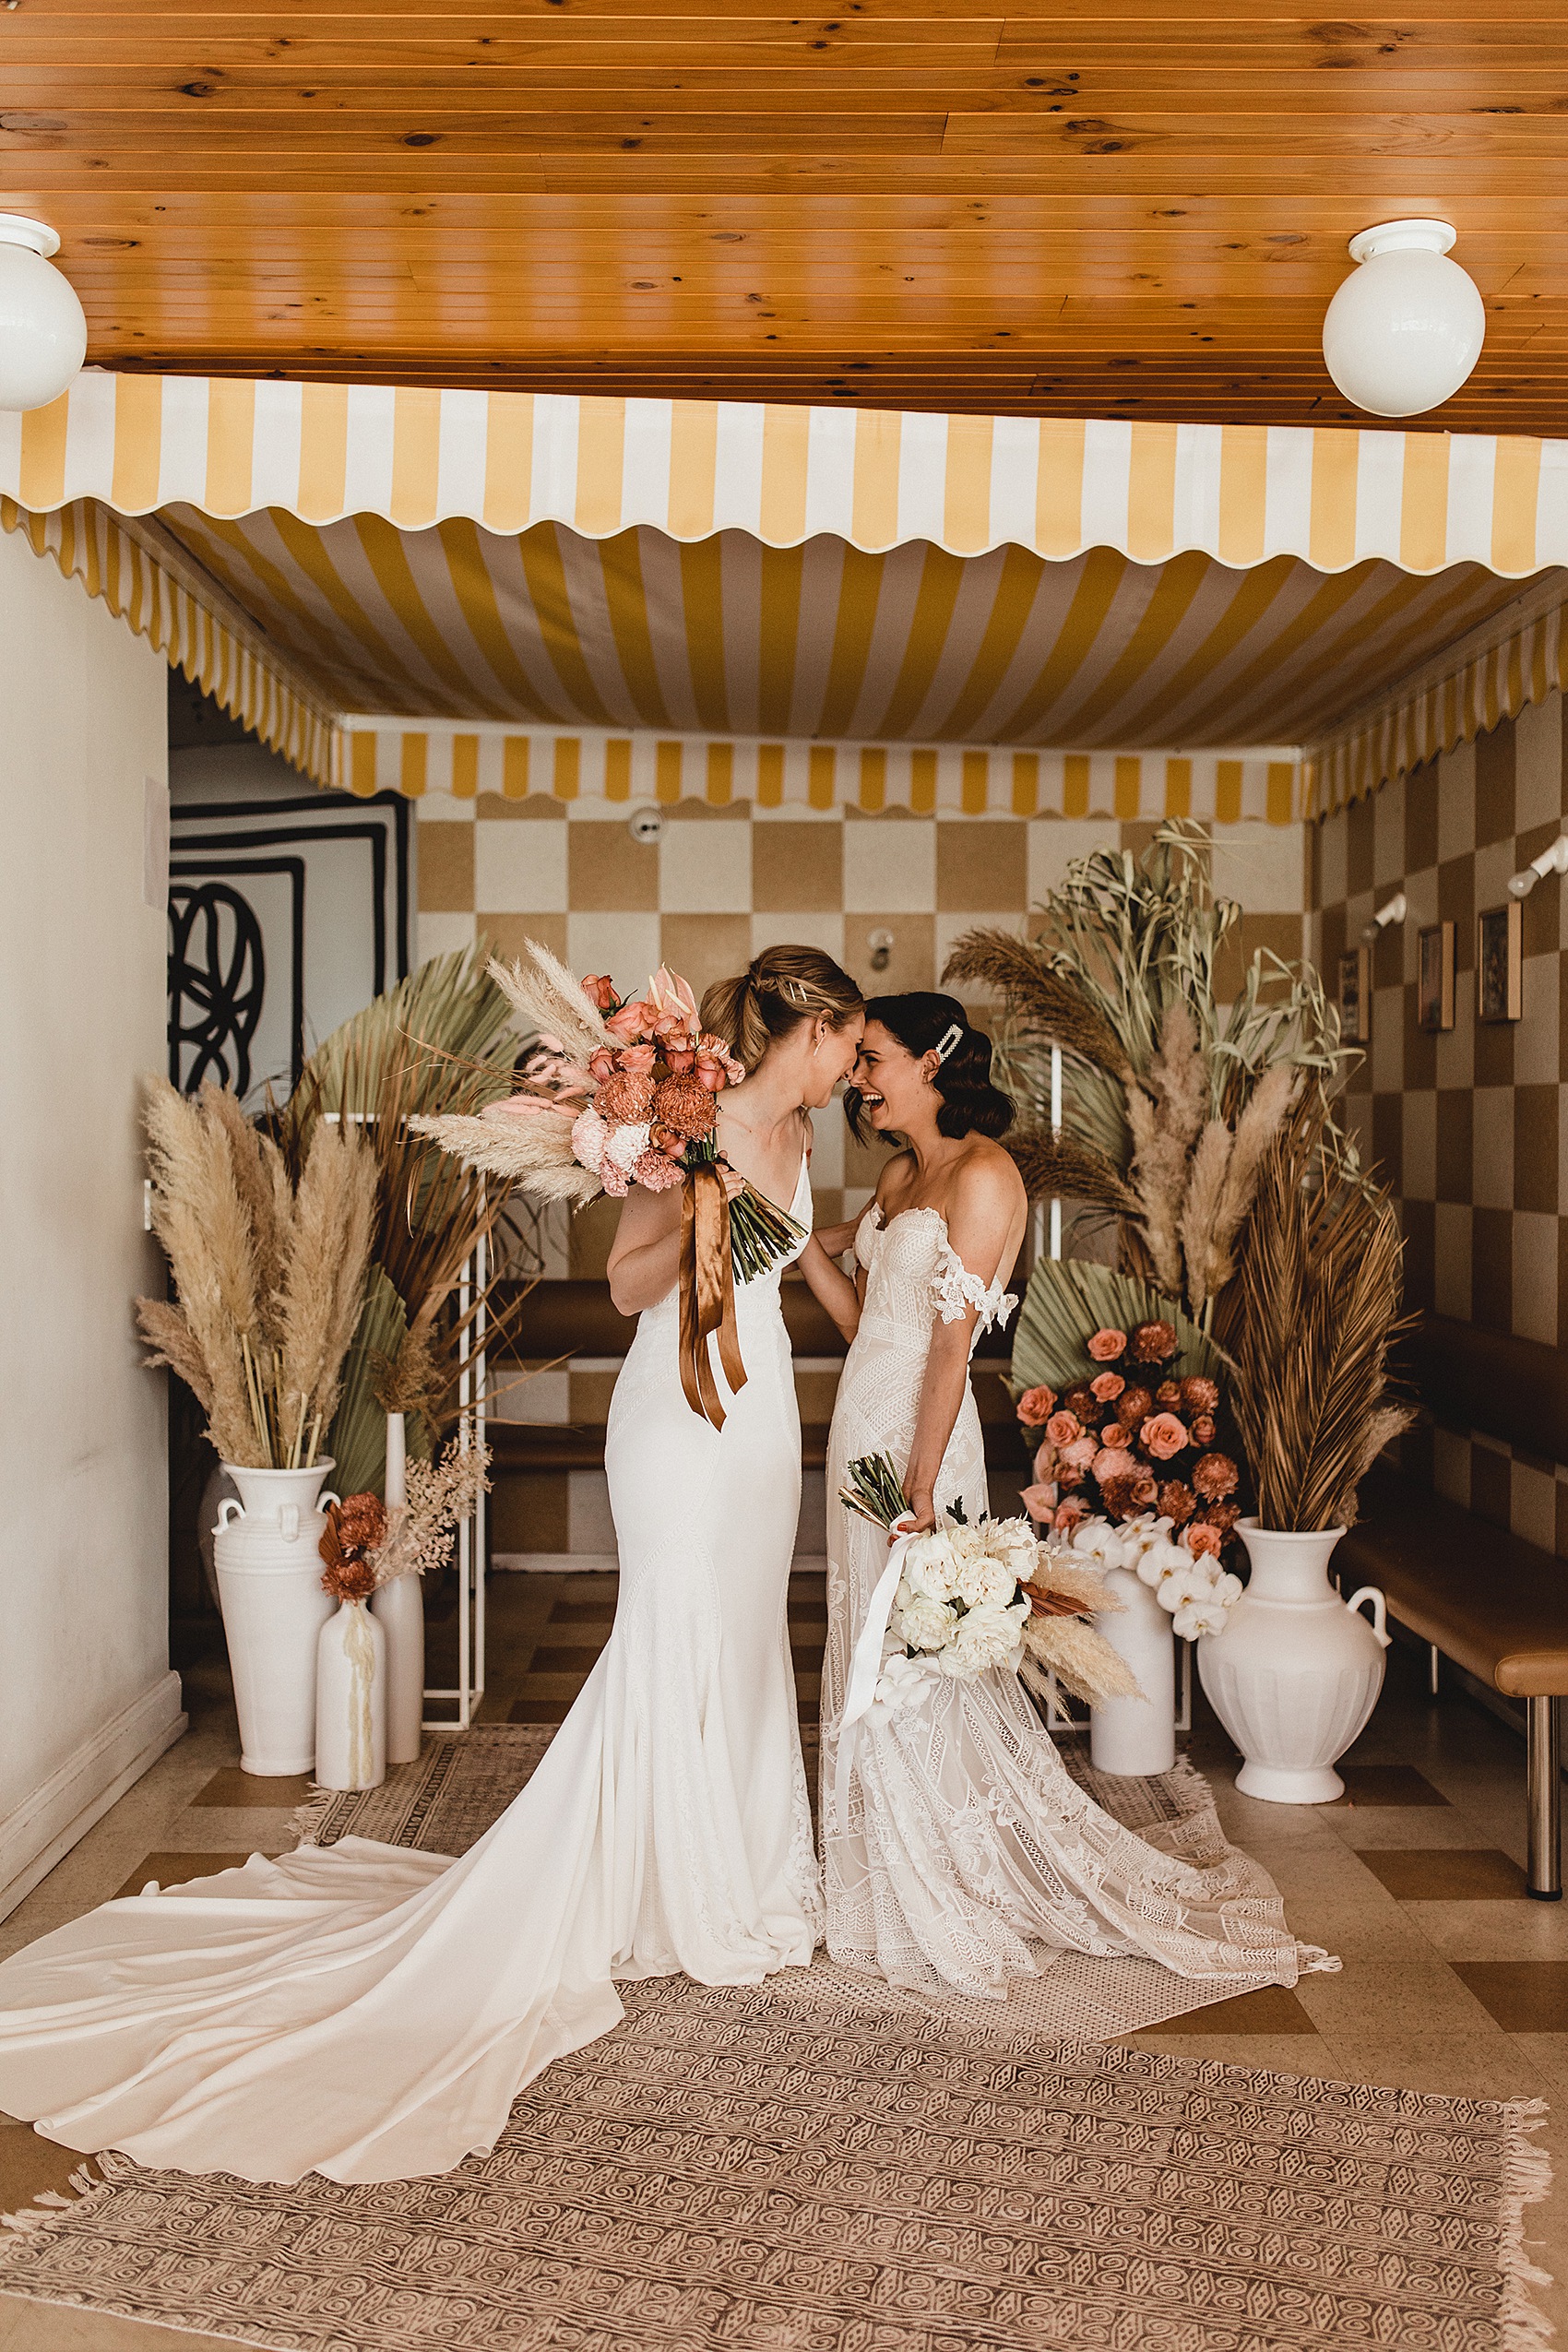 21 Two brides palm springs inspired wedding